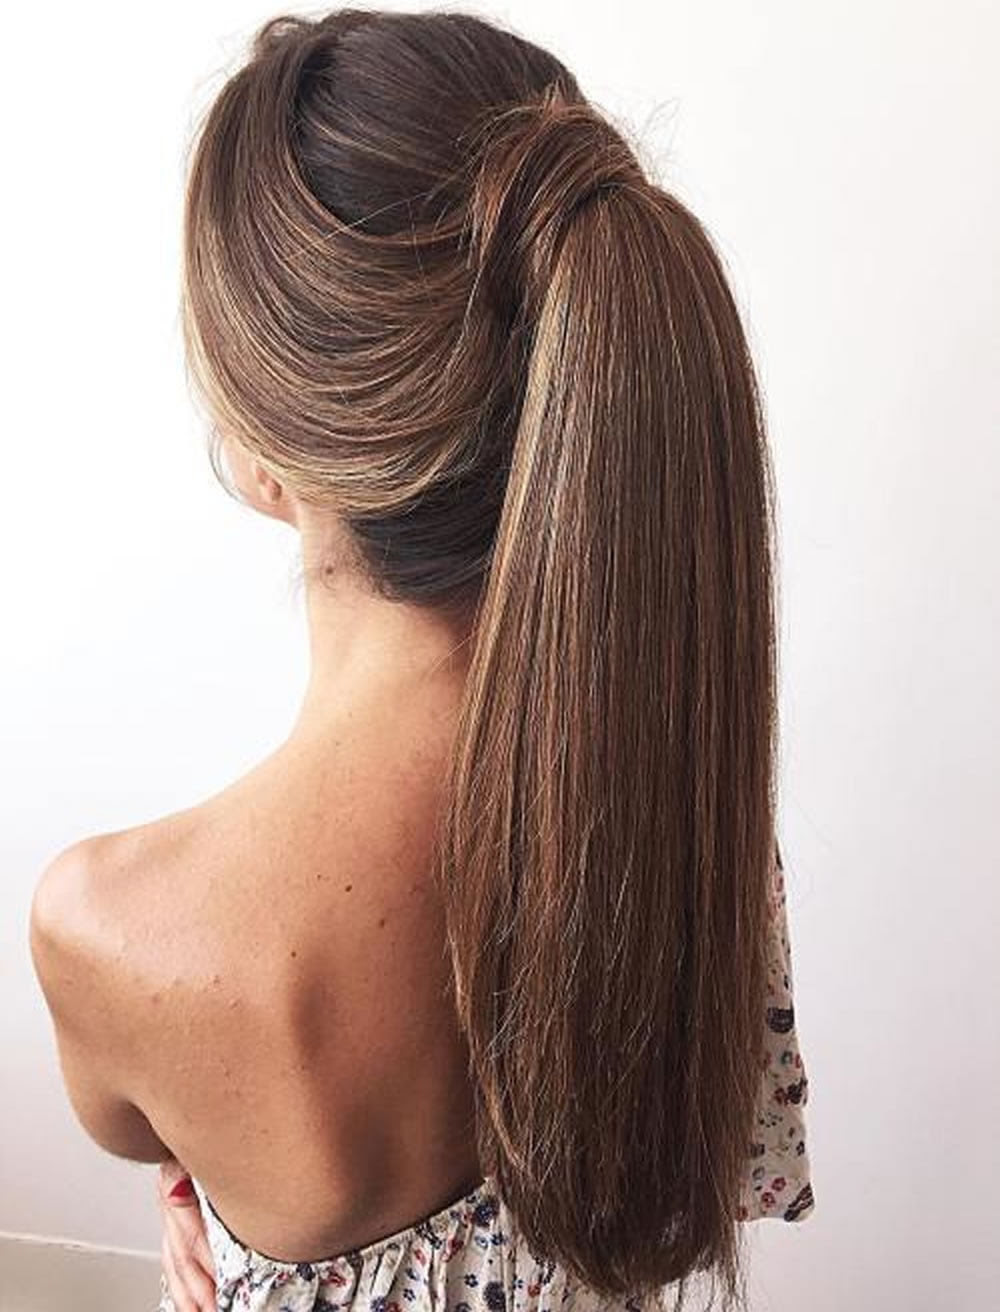 The 20 Most Attractive Ponytail Hairstyles for Women ...